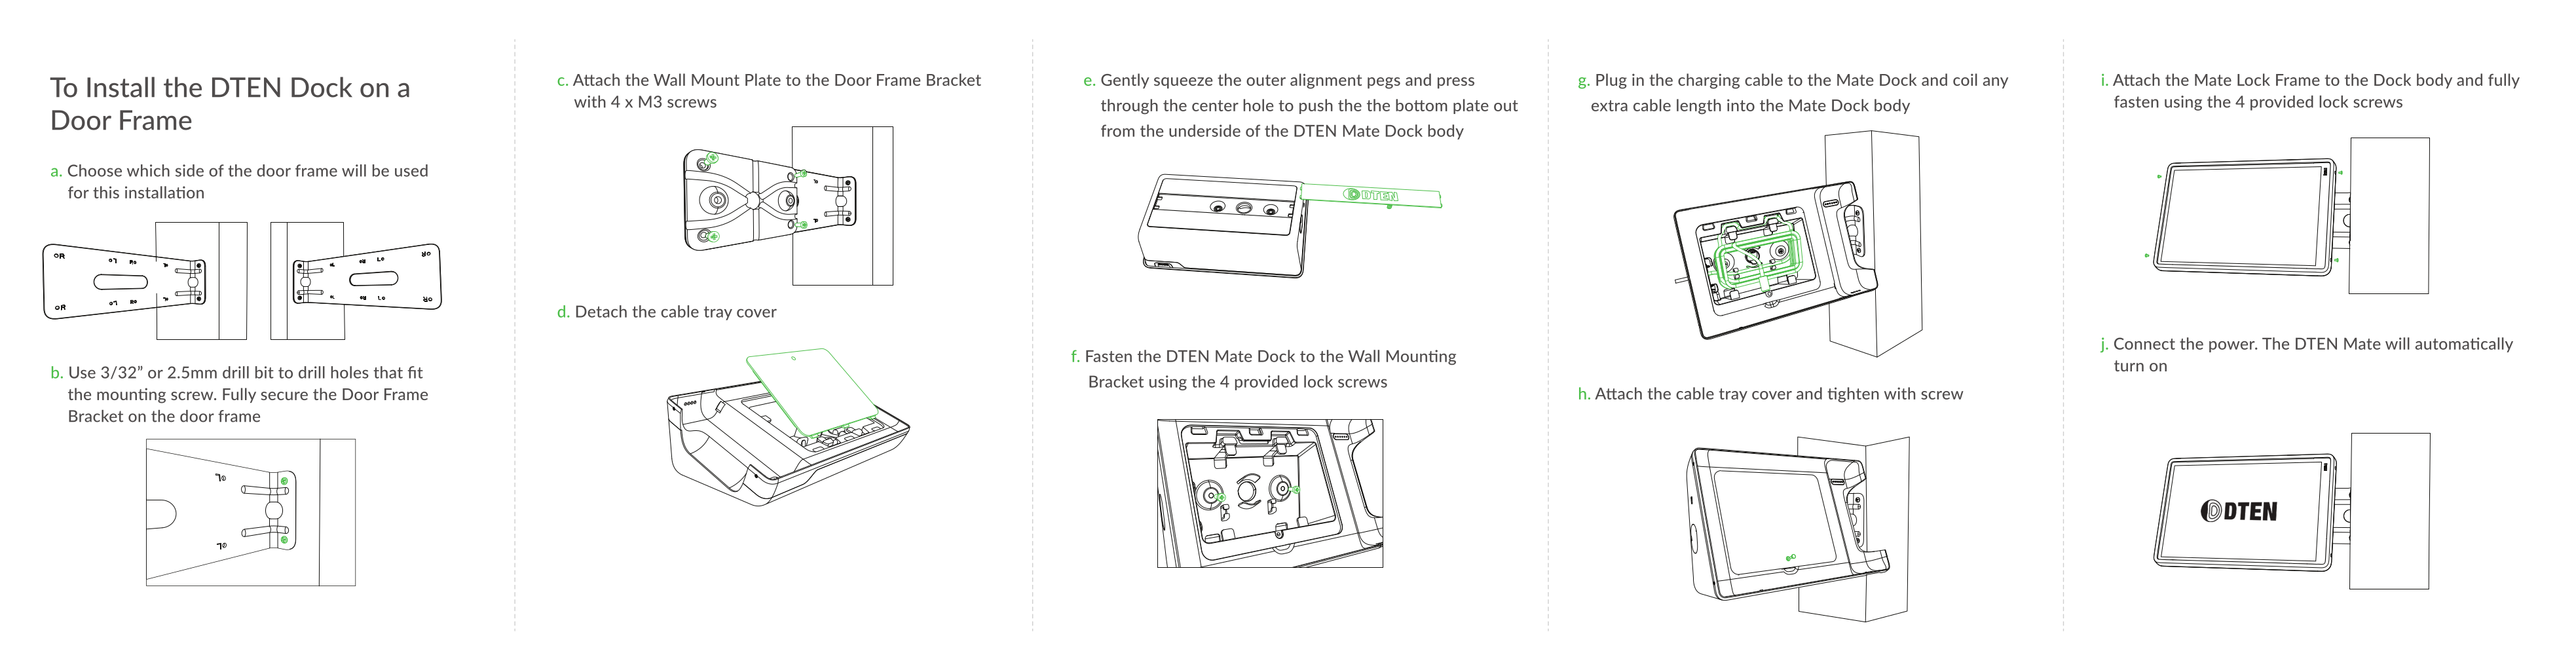 DTEN_Dock_Product_Guide_0083113.png